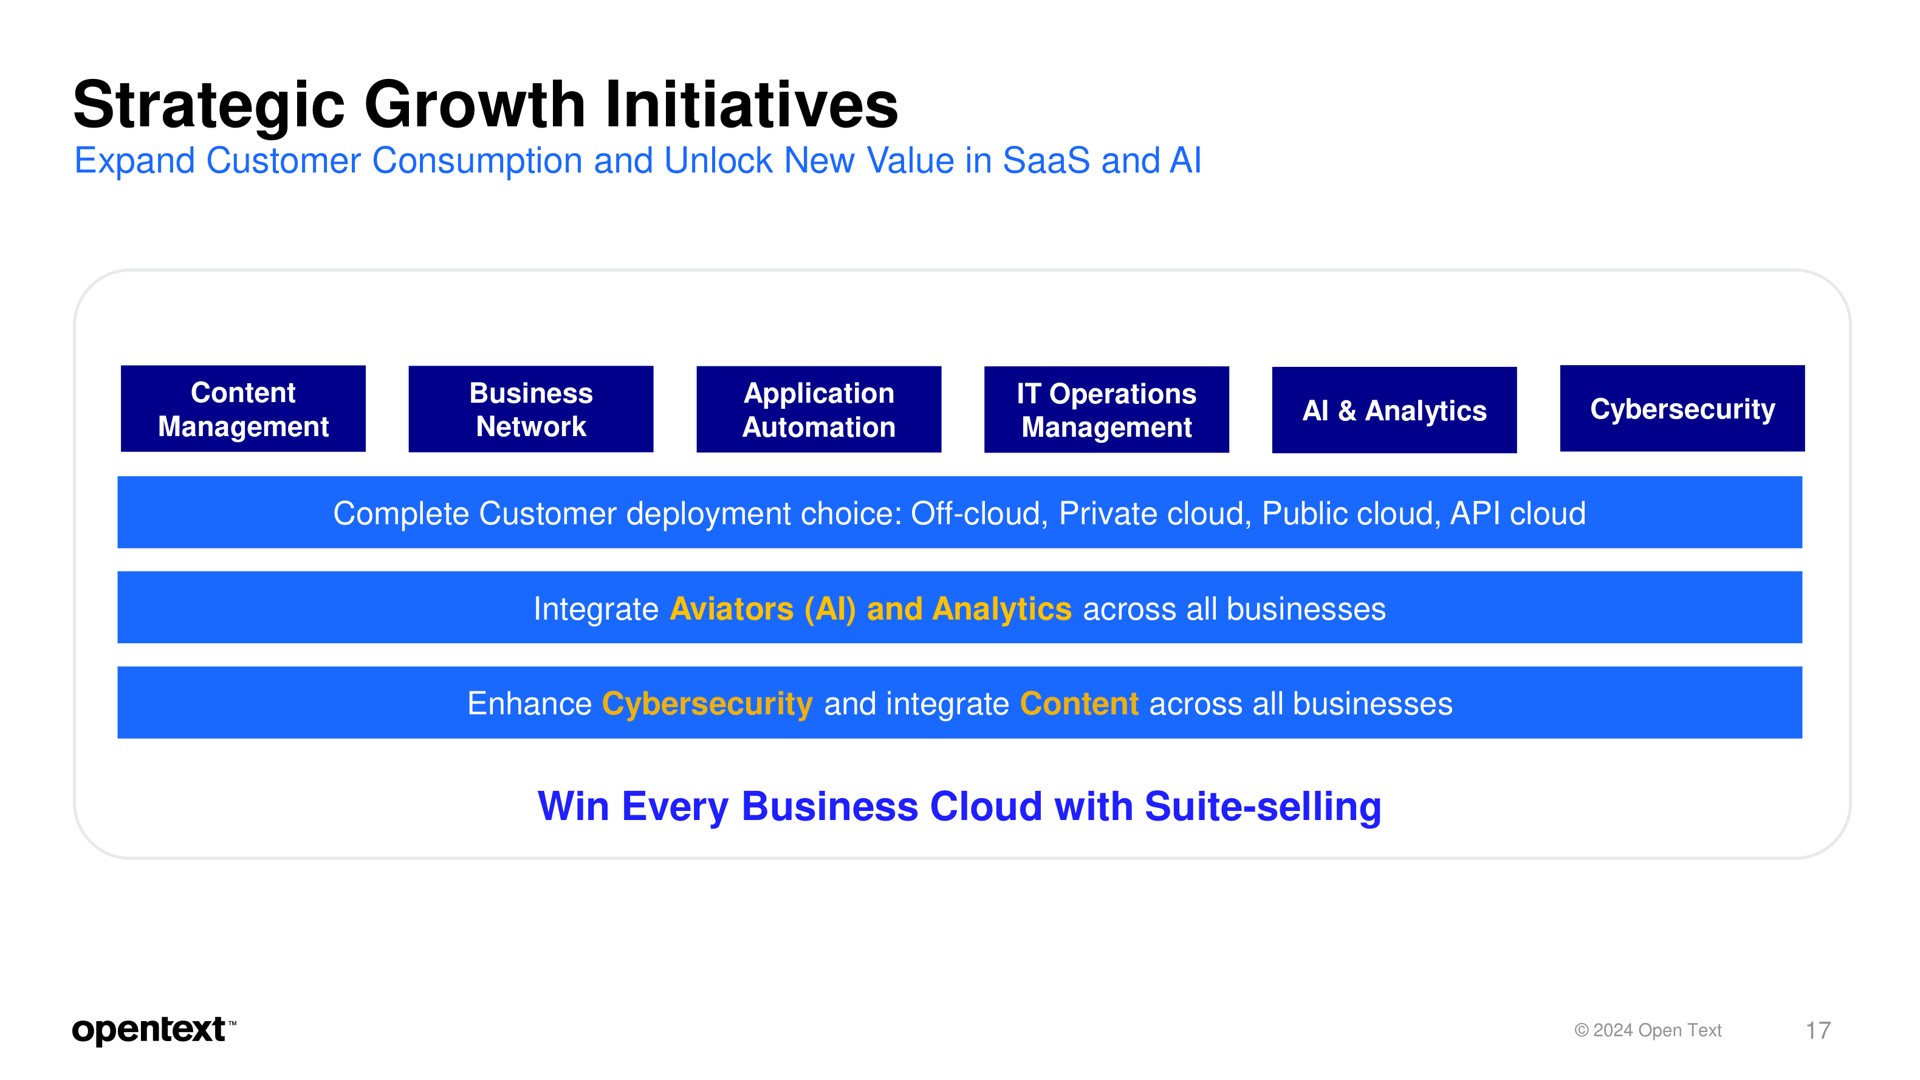 strategic growth initiatives win every business cloud with suite selling | OpenText